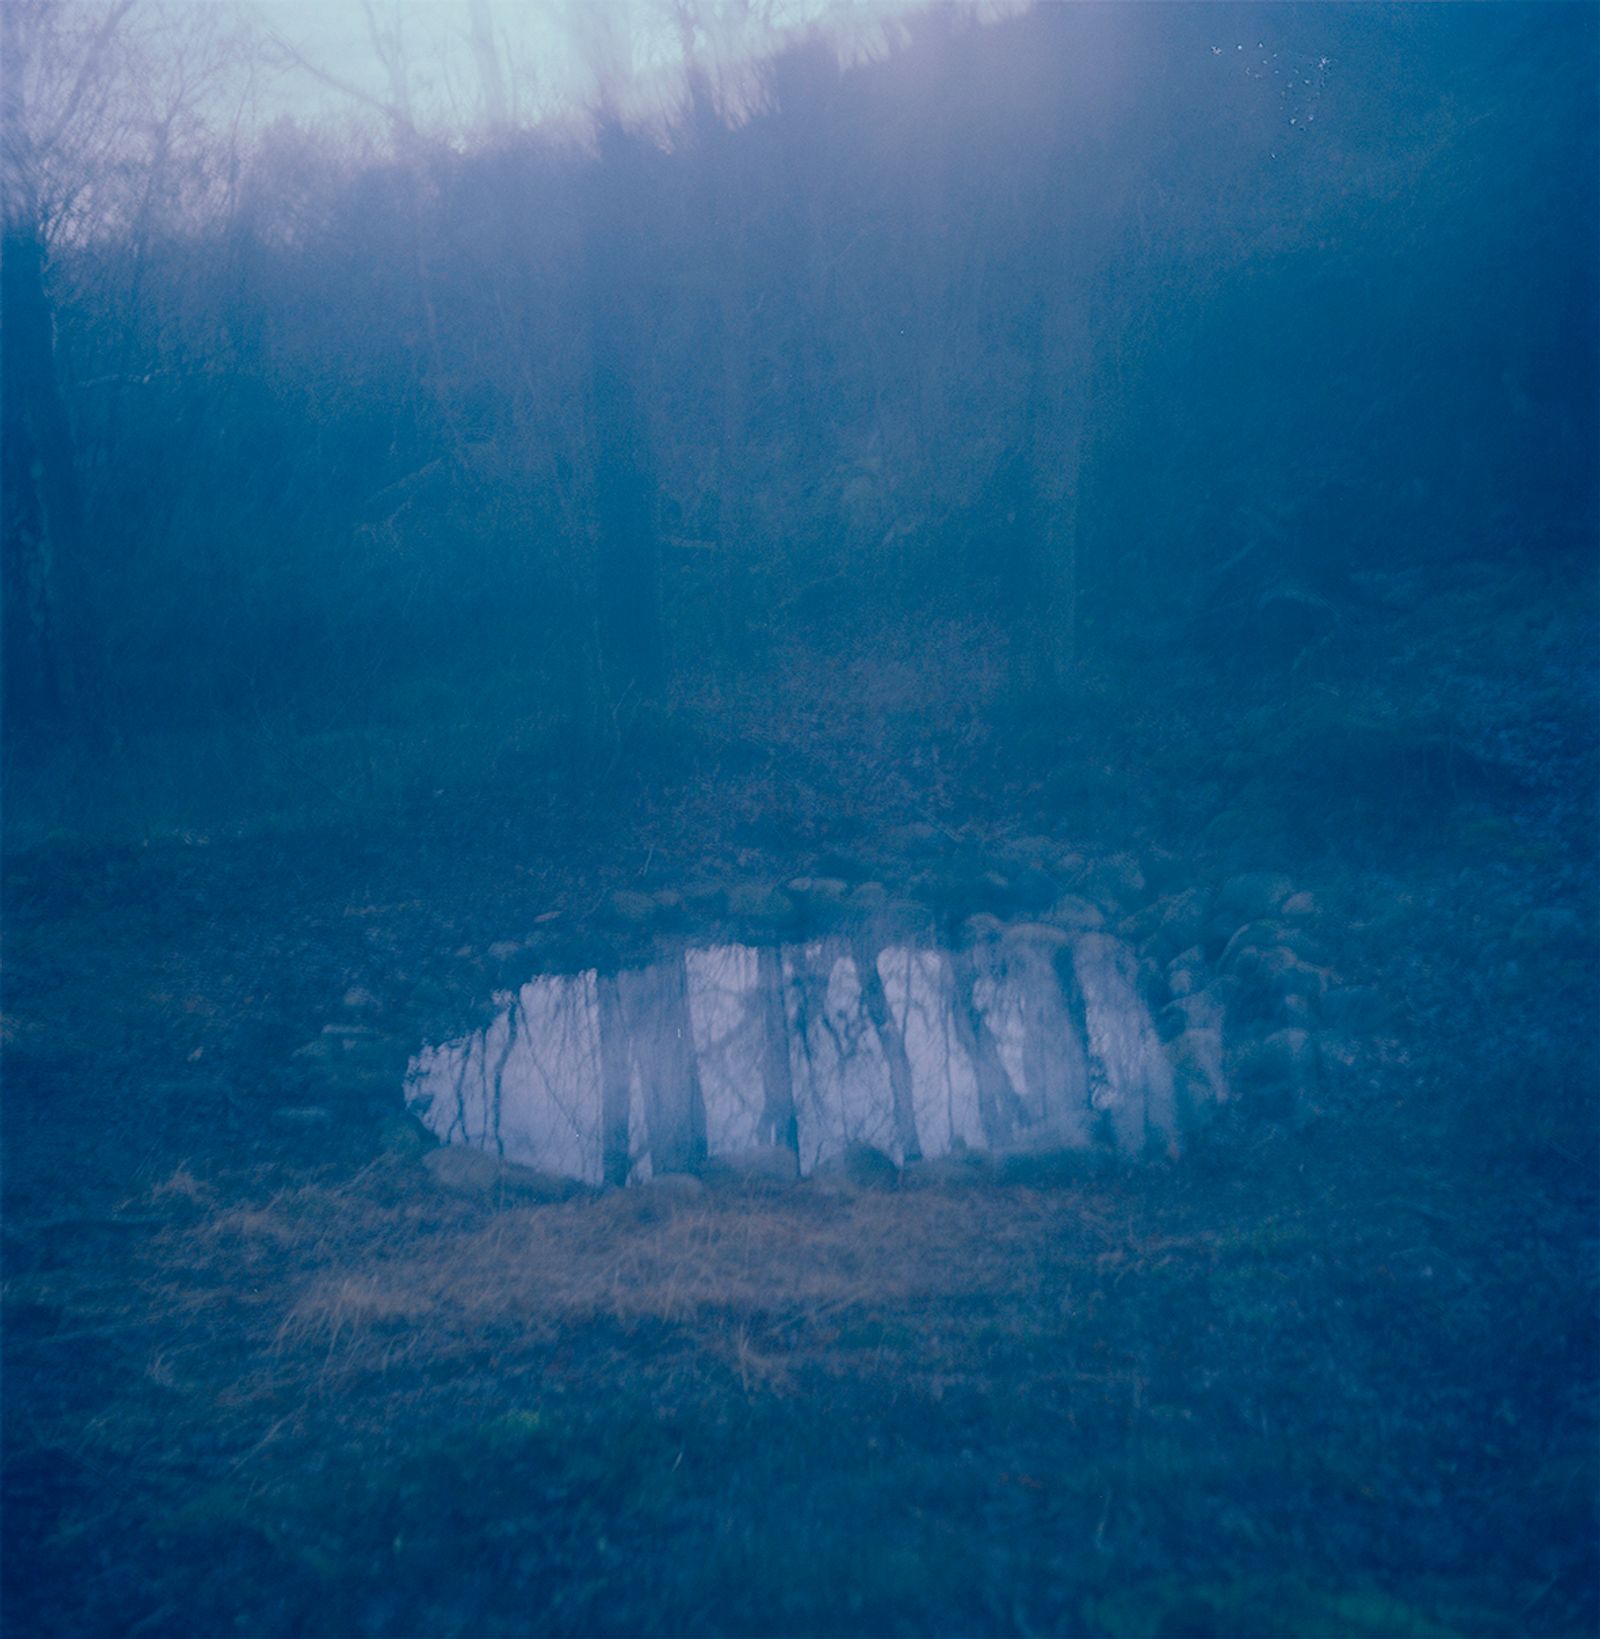 © Charlotta Hammar - Image from the ALL SHELTERS ARE MARKED WITH A SIGN photography project